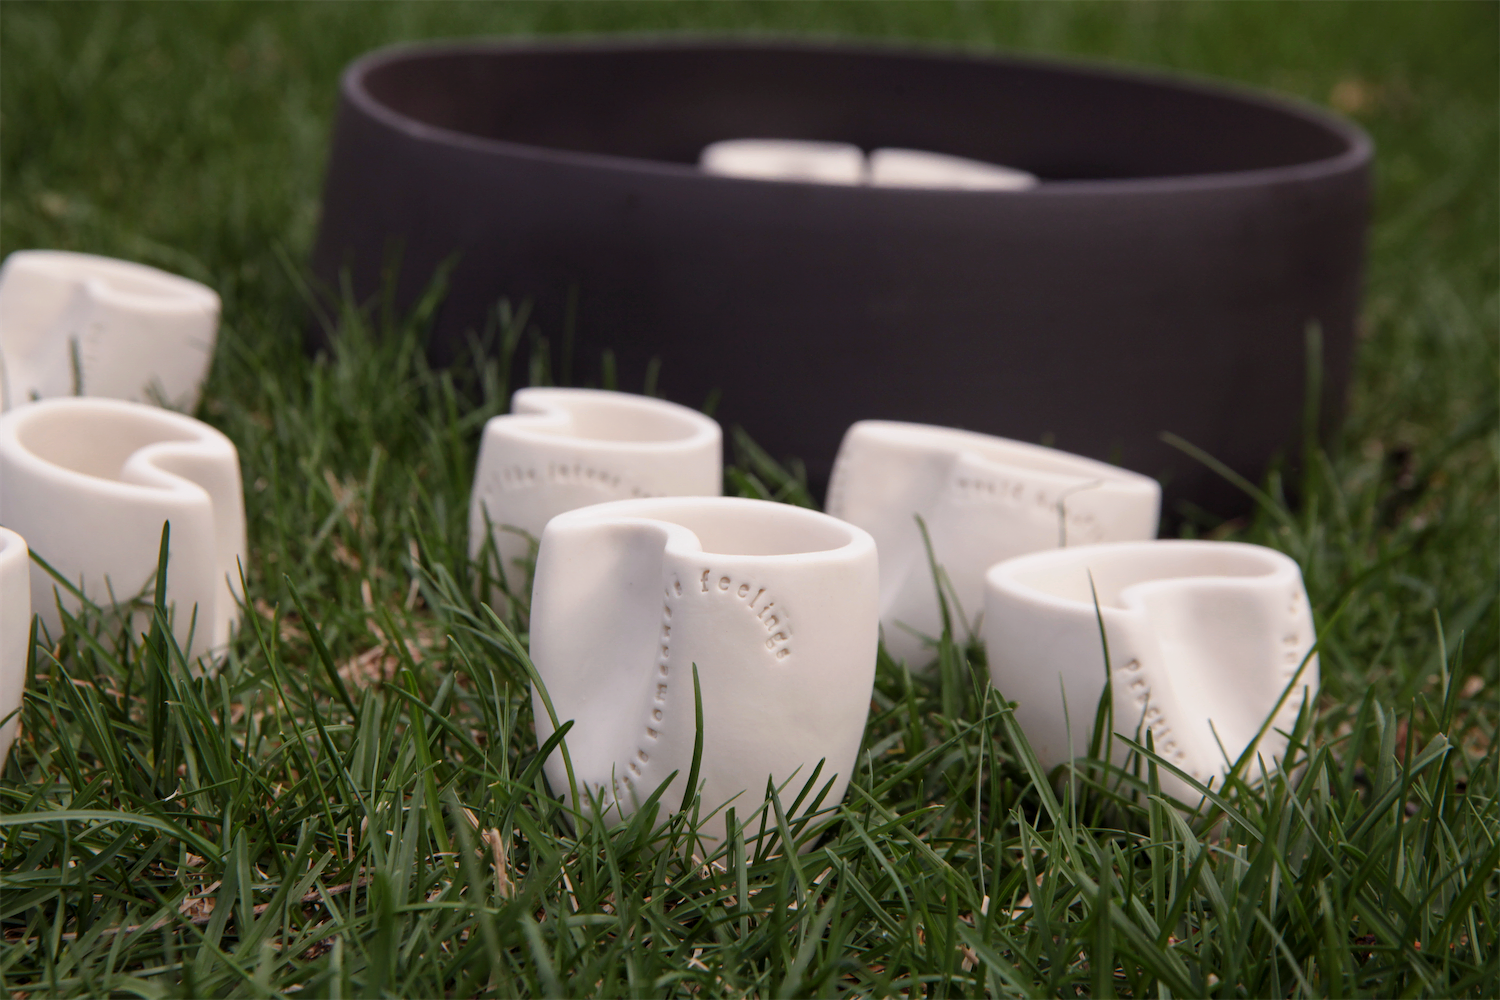 Several cups scattered outside of the carrier in the grass.  The carrier is in the background.